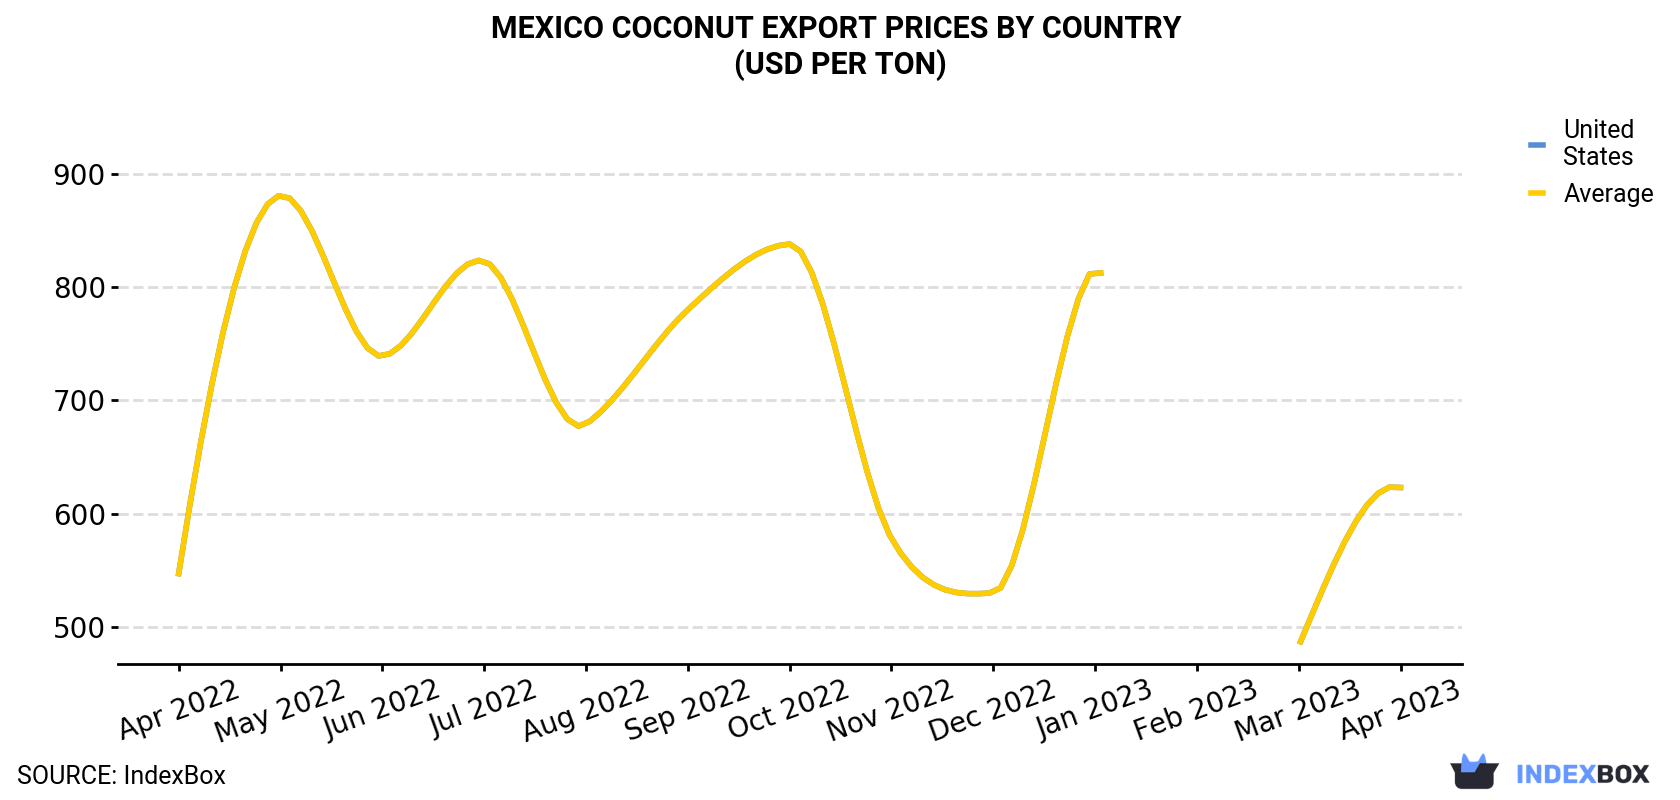 Mexico Coconut Export Prices By Country (USD Per Ton)